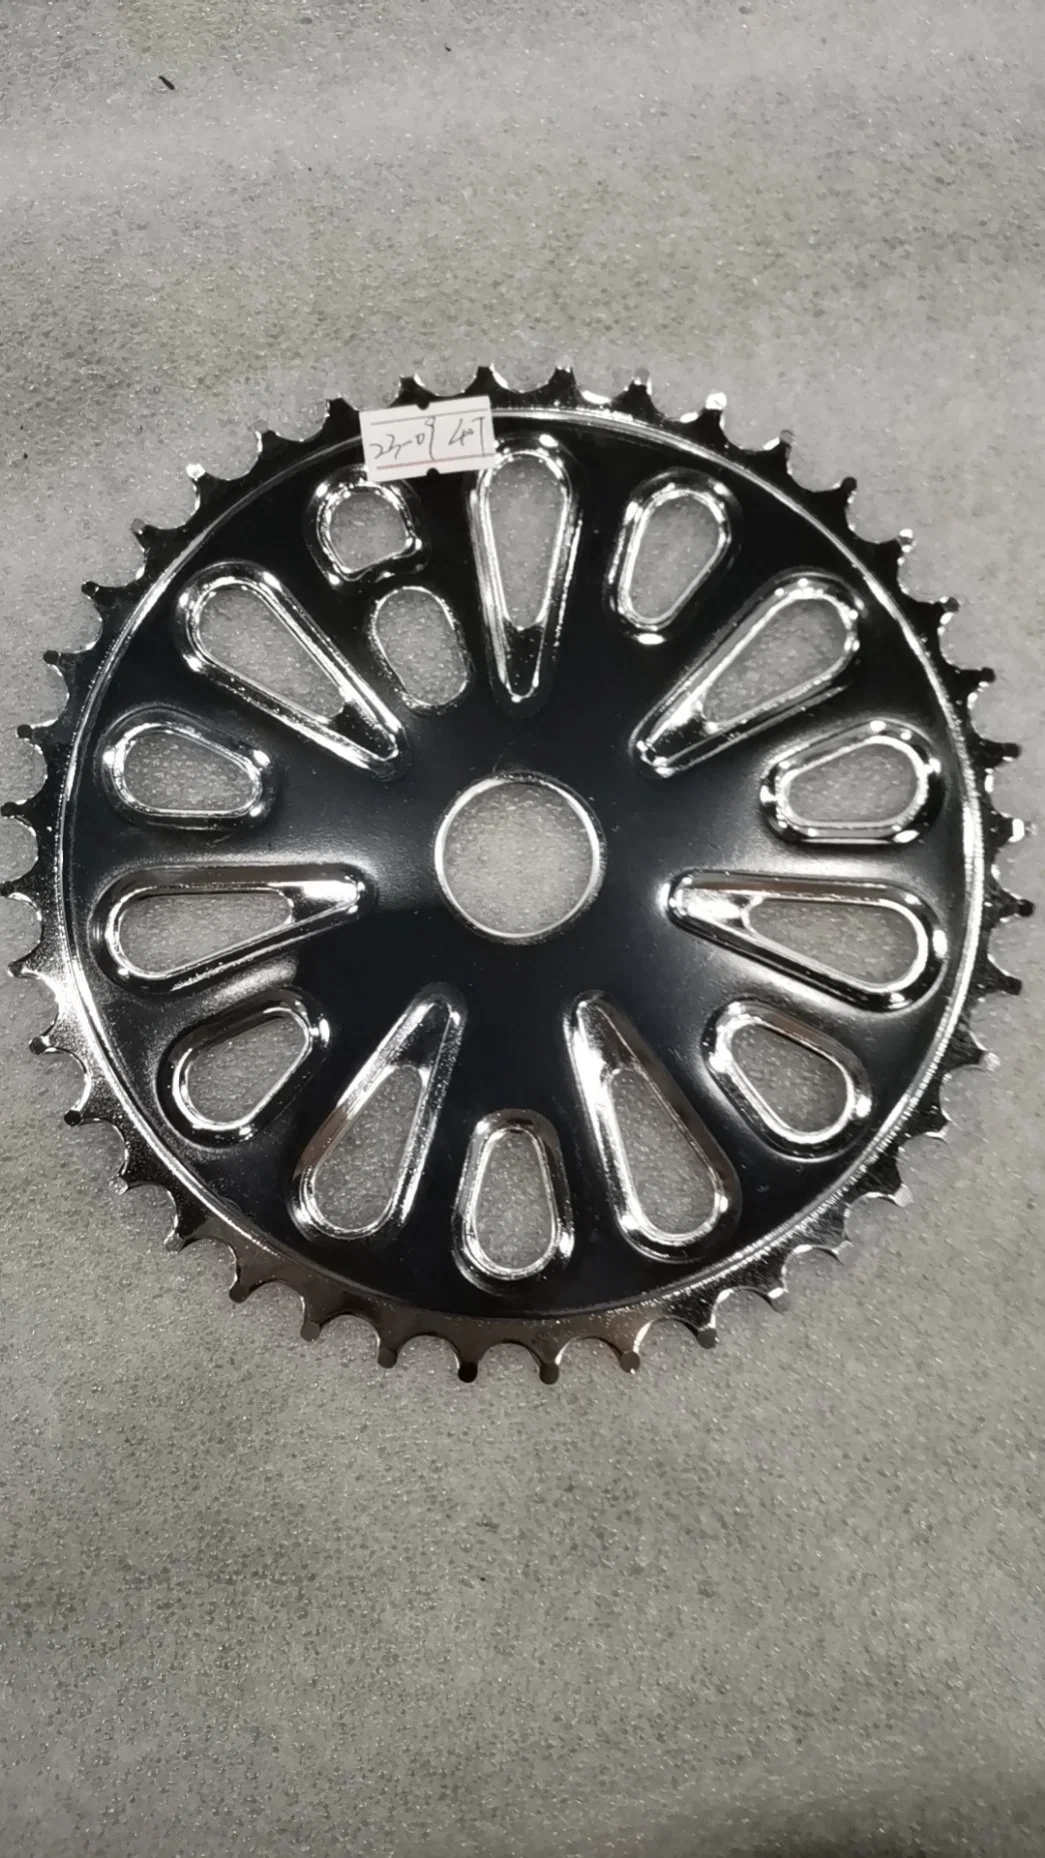 China Factory Bicycle Crank and Chainwheel for Road Bikes for Sale